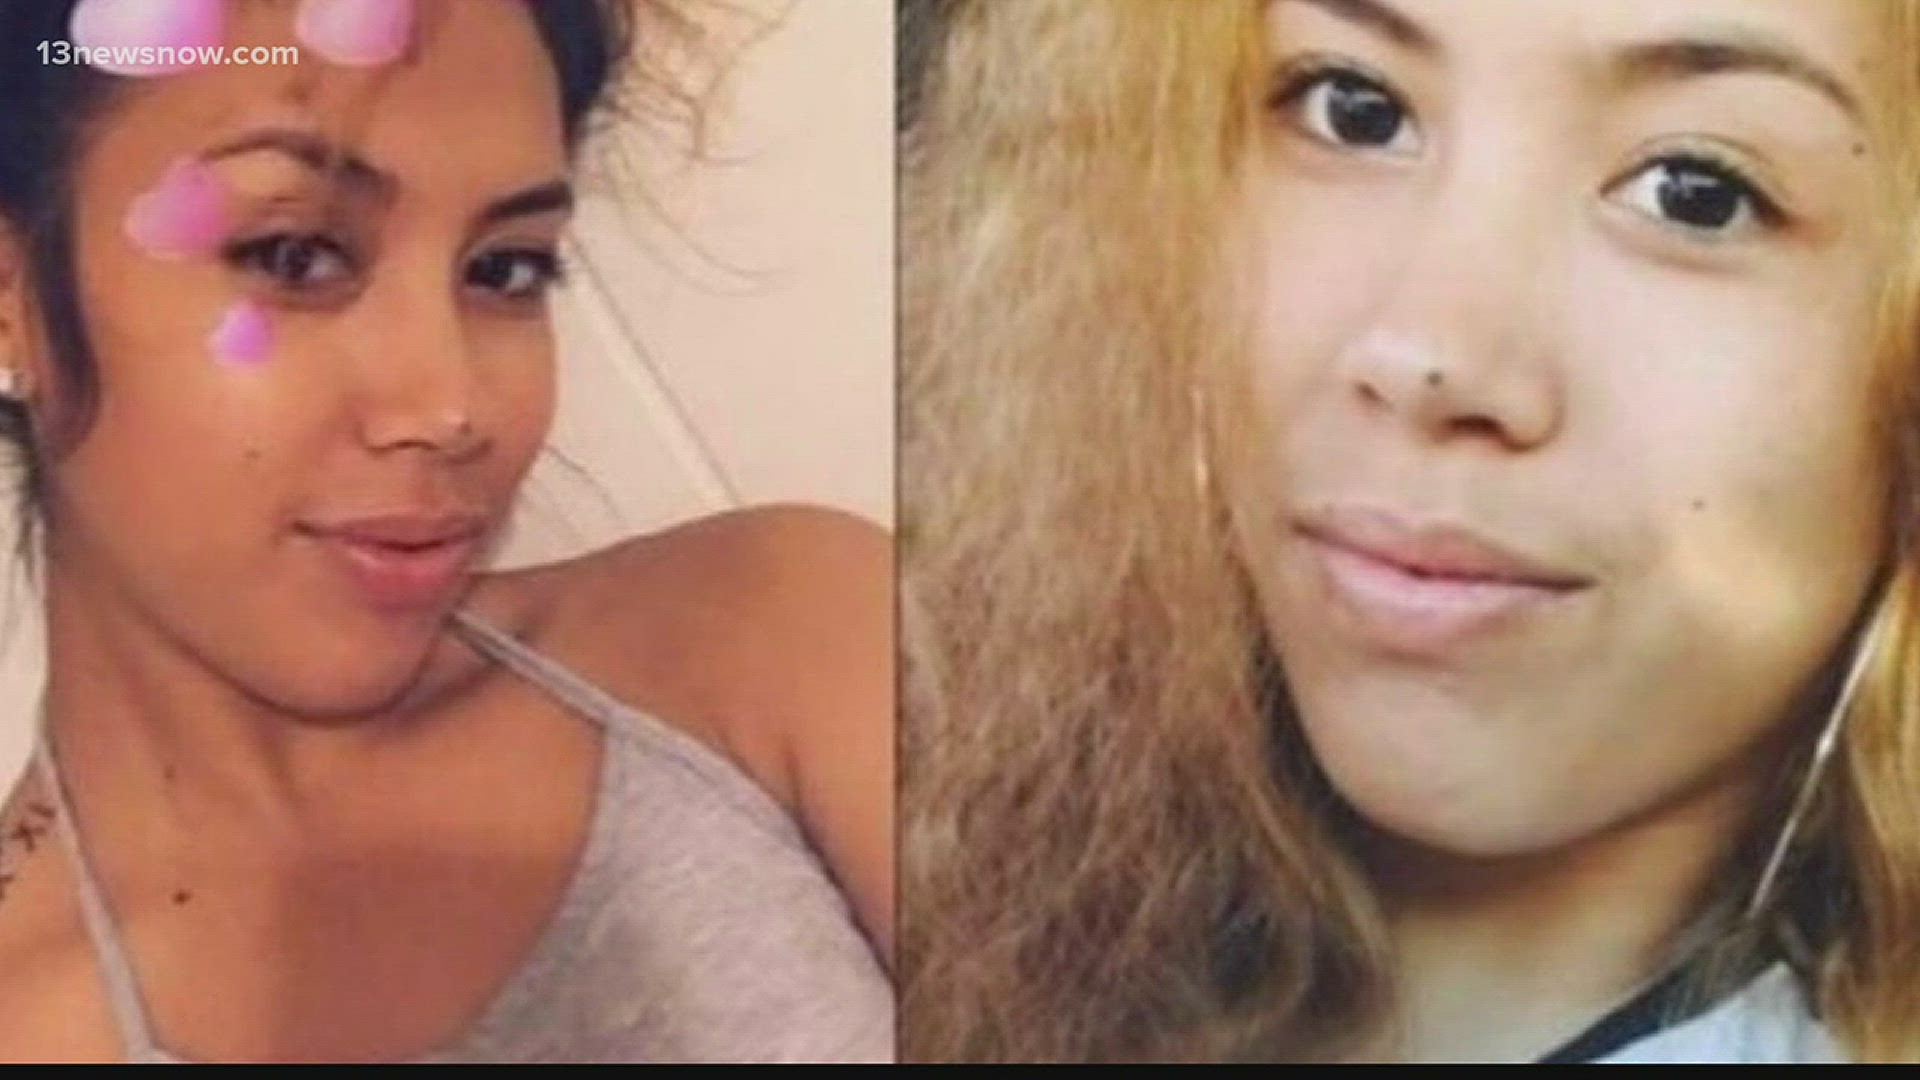 U-S marshals took 21-year-old Shanon Hodges into custody Wednesday in Honolulu, Hawaii for allegedly killing her 19-year-old husband in Newport News last year.